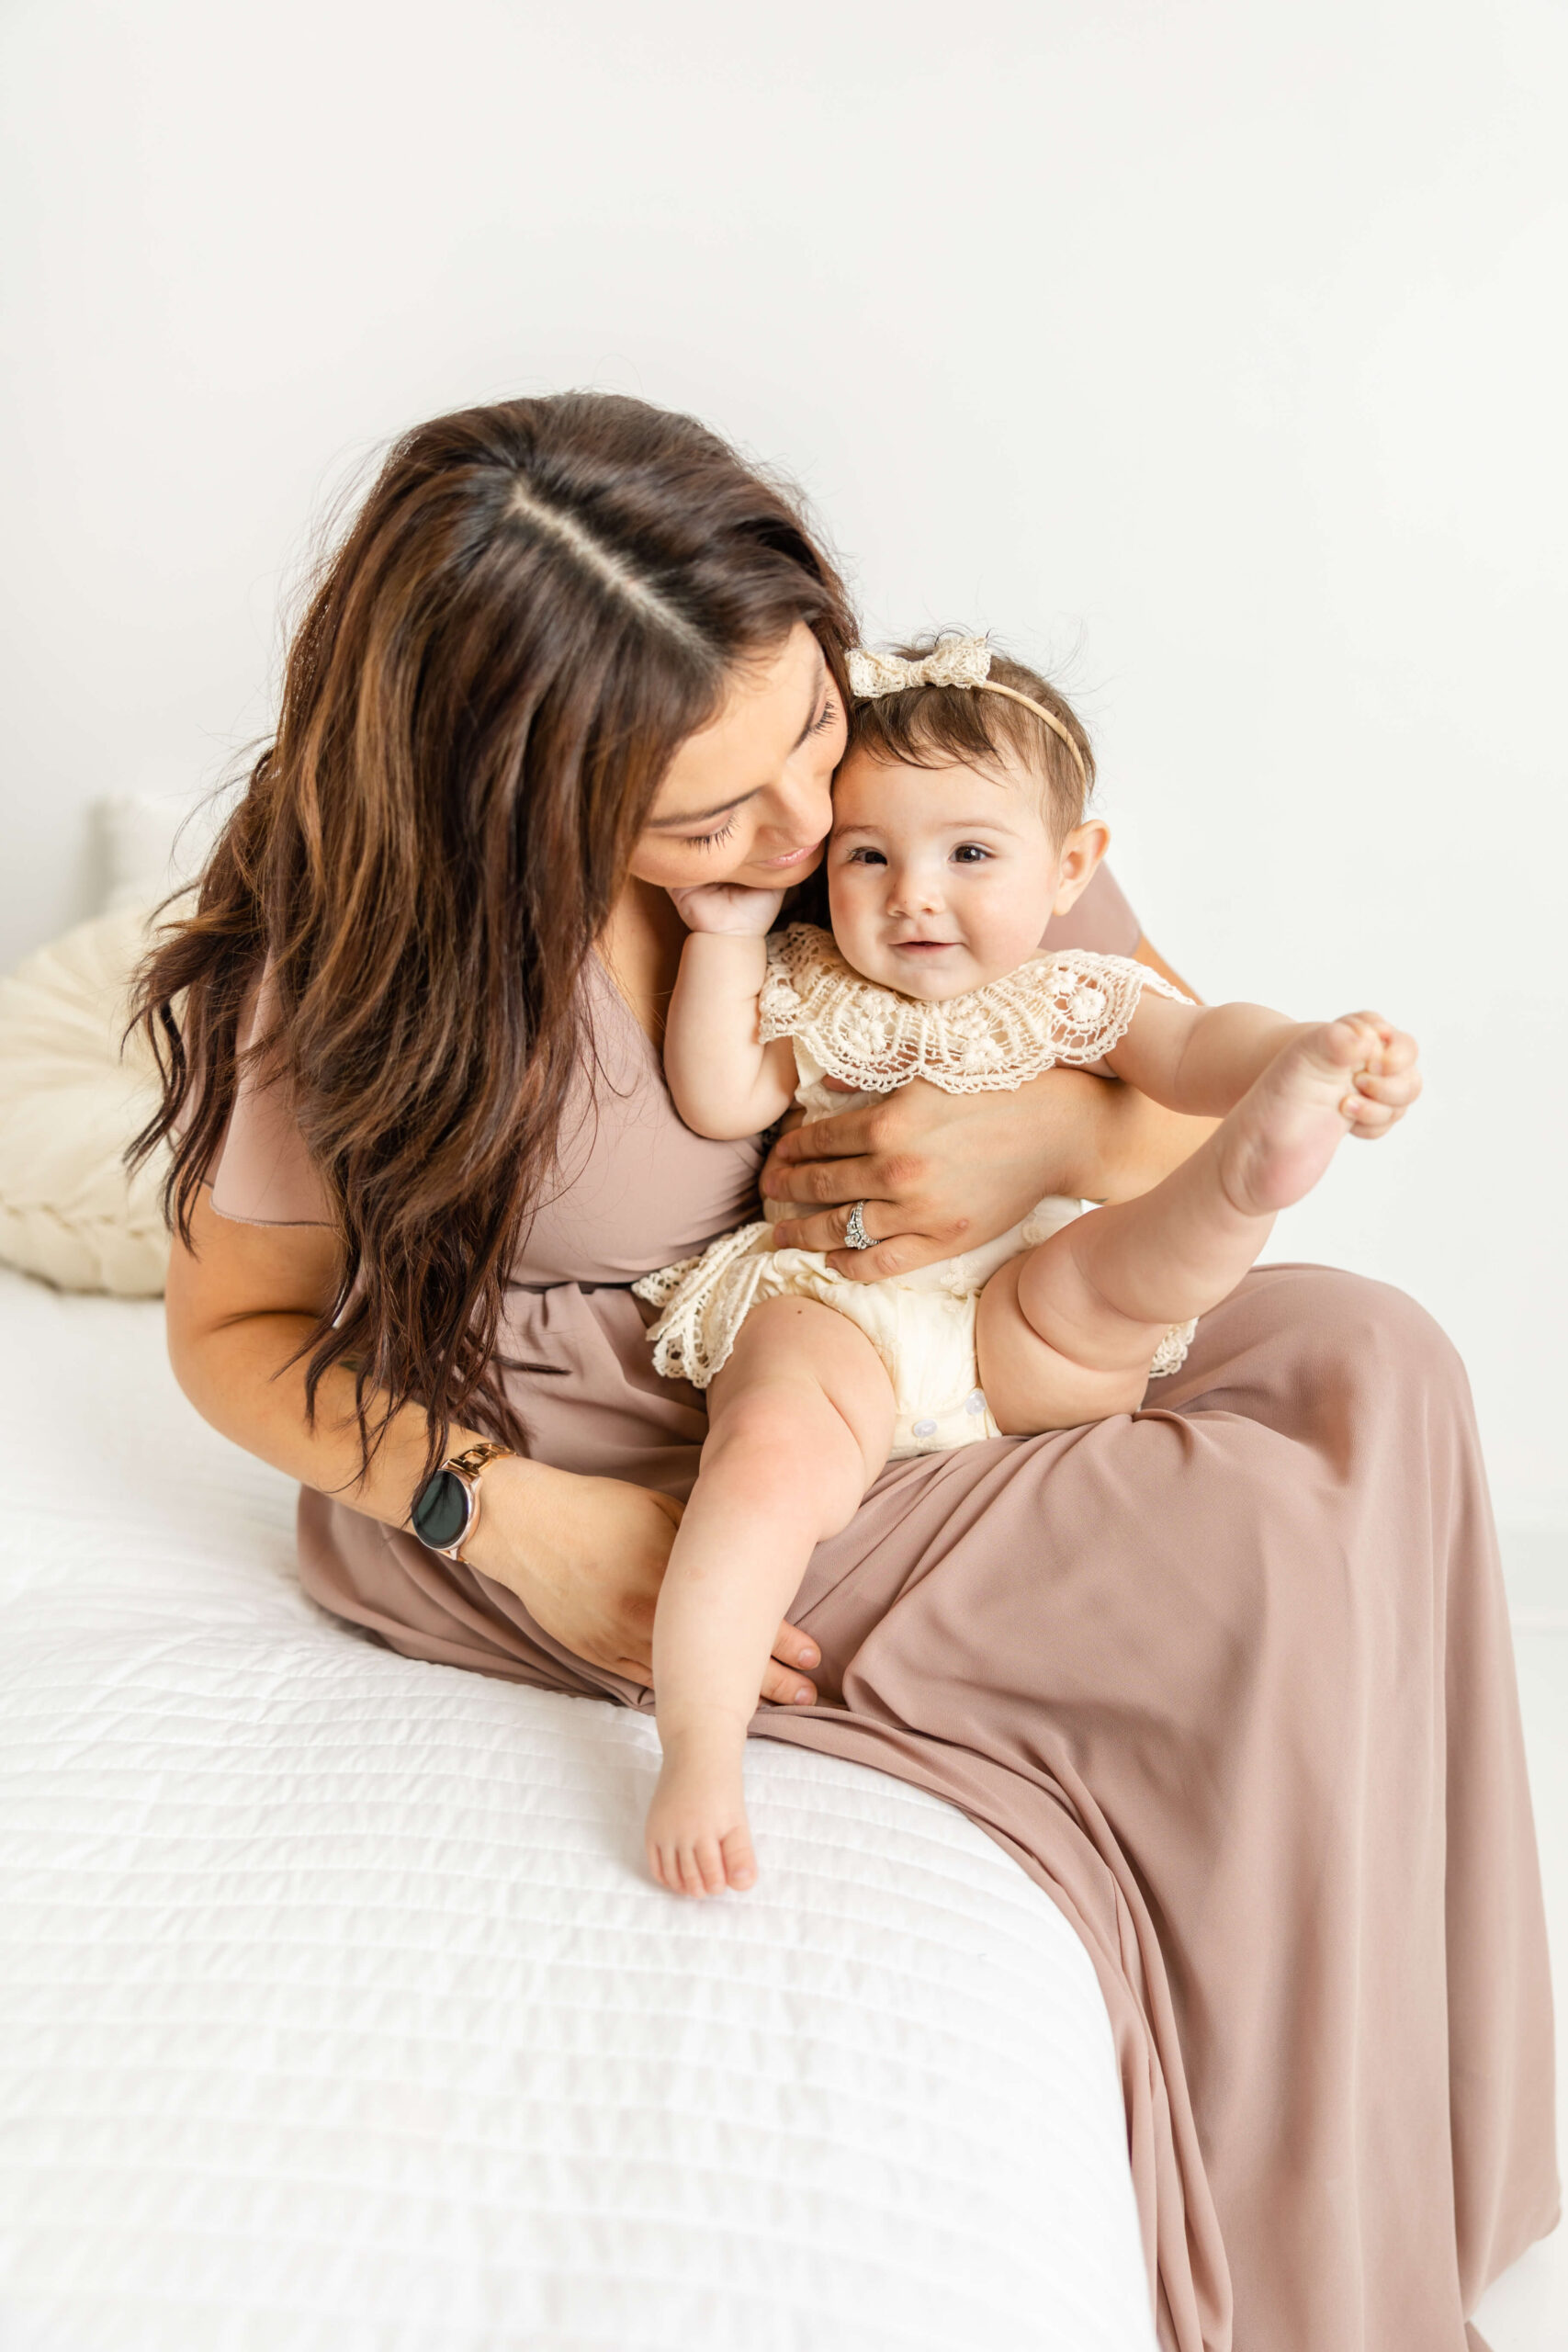 Mom and her sweet girl sitting on a bed during their motherhood session.